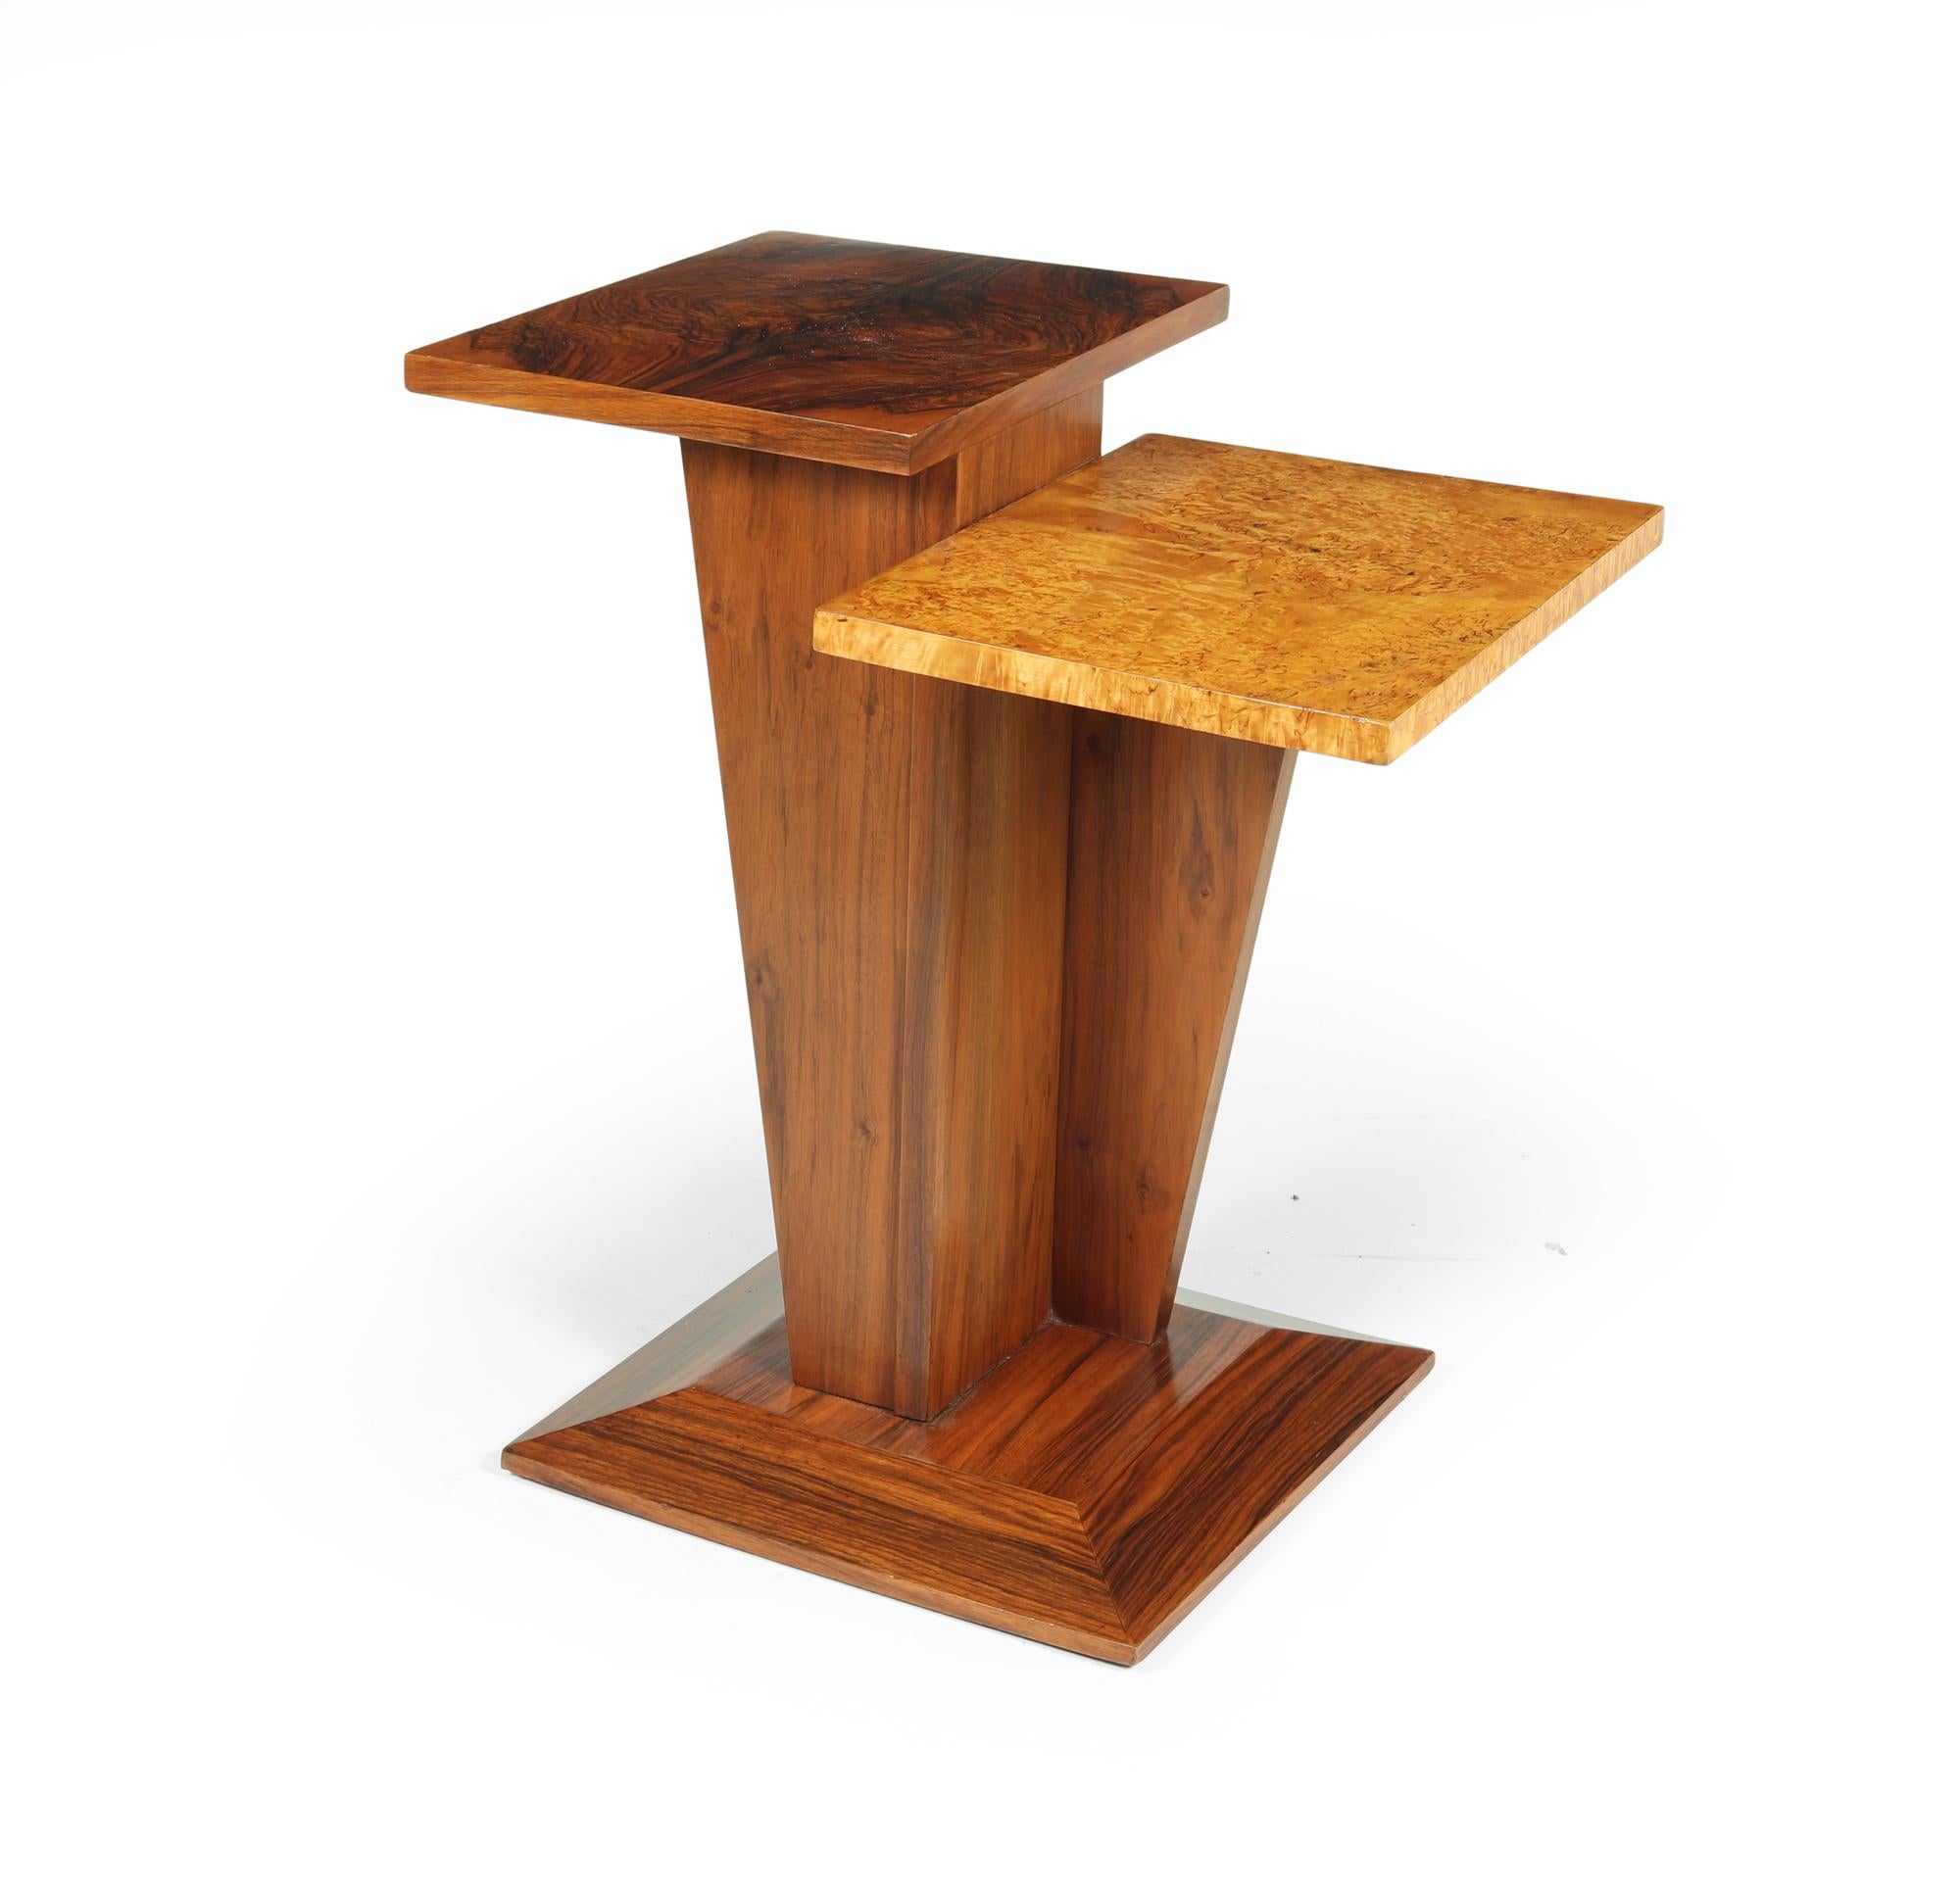 A very unusual French Art deco occasional table with two different height tops one in karelian birch and one in figured walnut on an angled center upright the table has been fully polished and is in excellent condition

Age: 1930

Style: Art